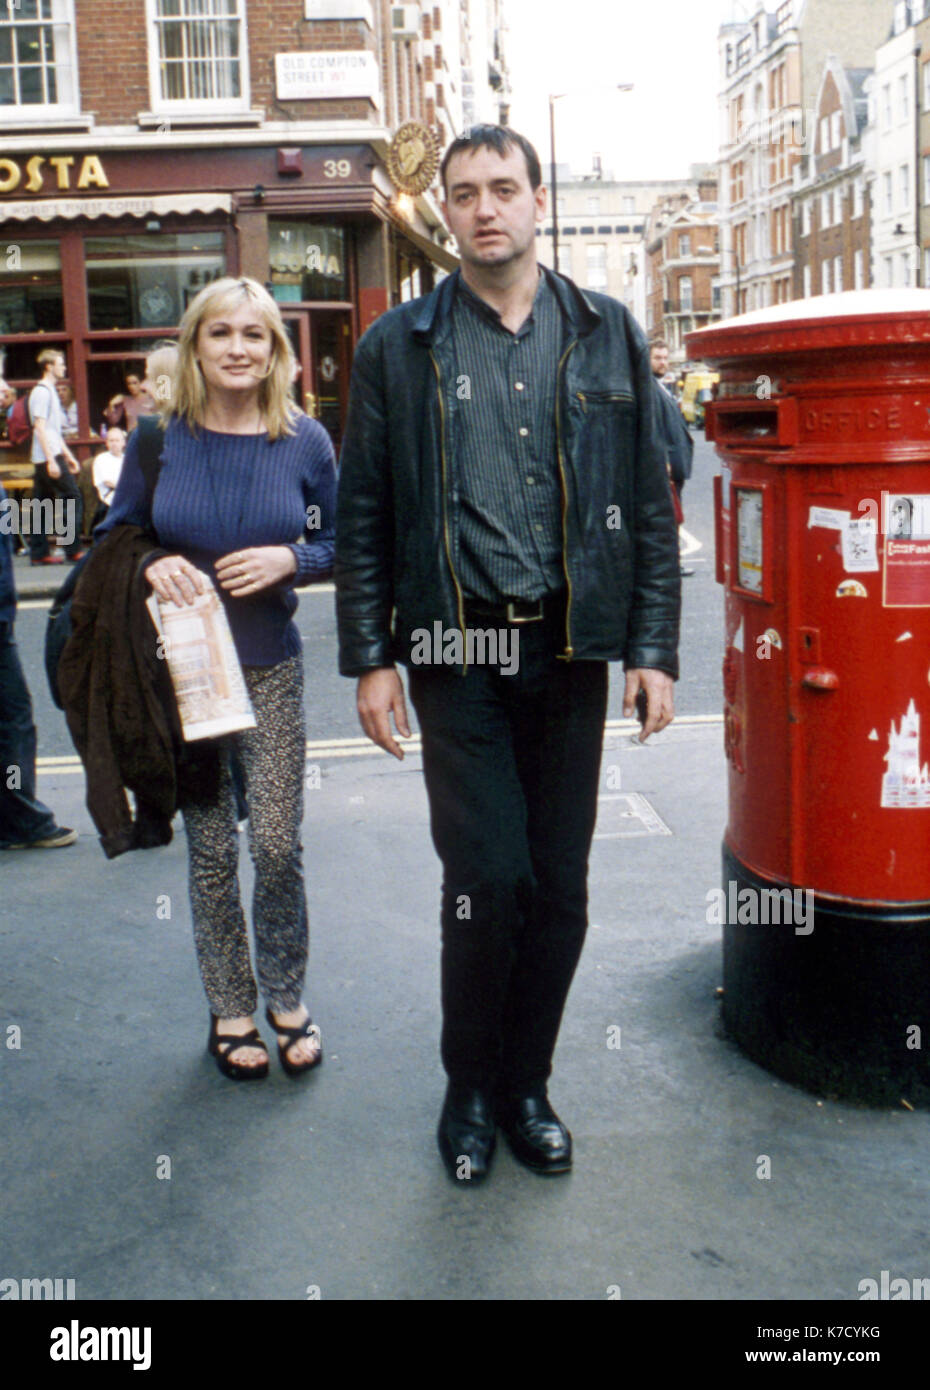 Photo Must Be Credited ©Alpha Press 037350 06/08/1999 Craig Cash and Caroline Aherne walking around Old Compton Street in Soho, London Stock Photo